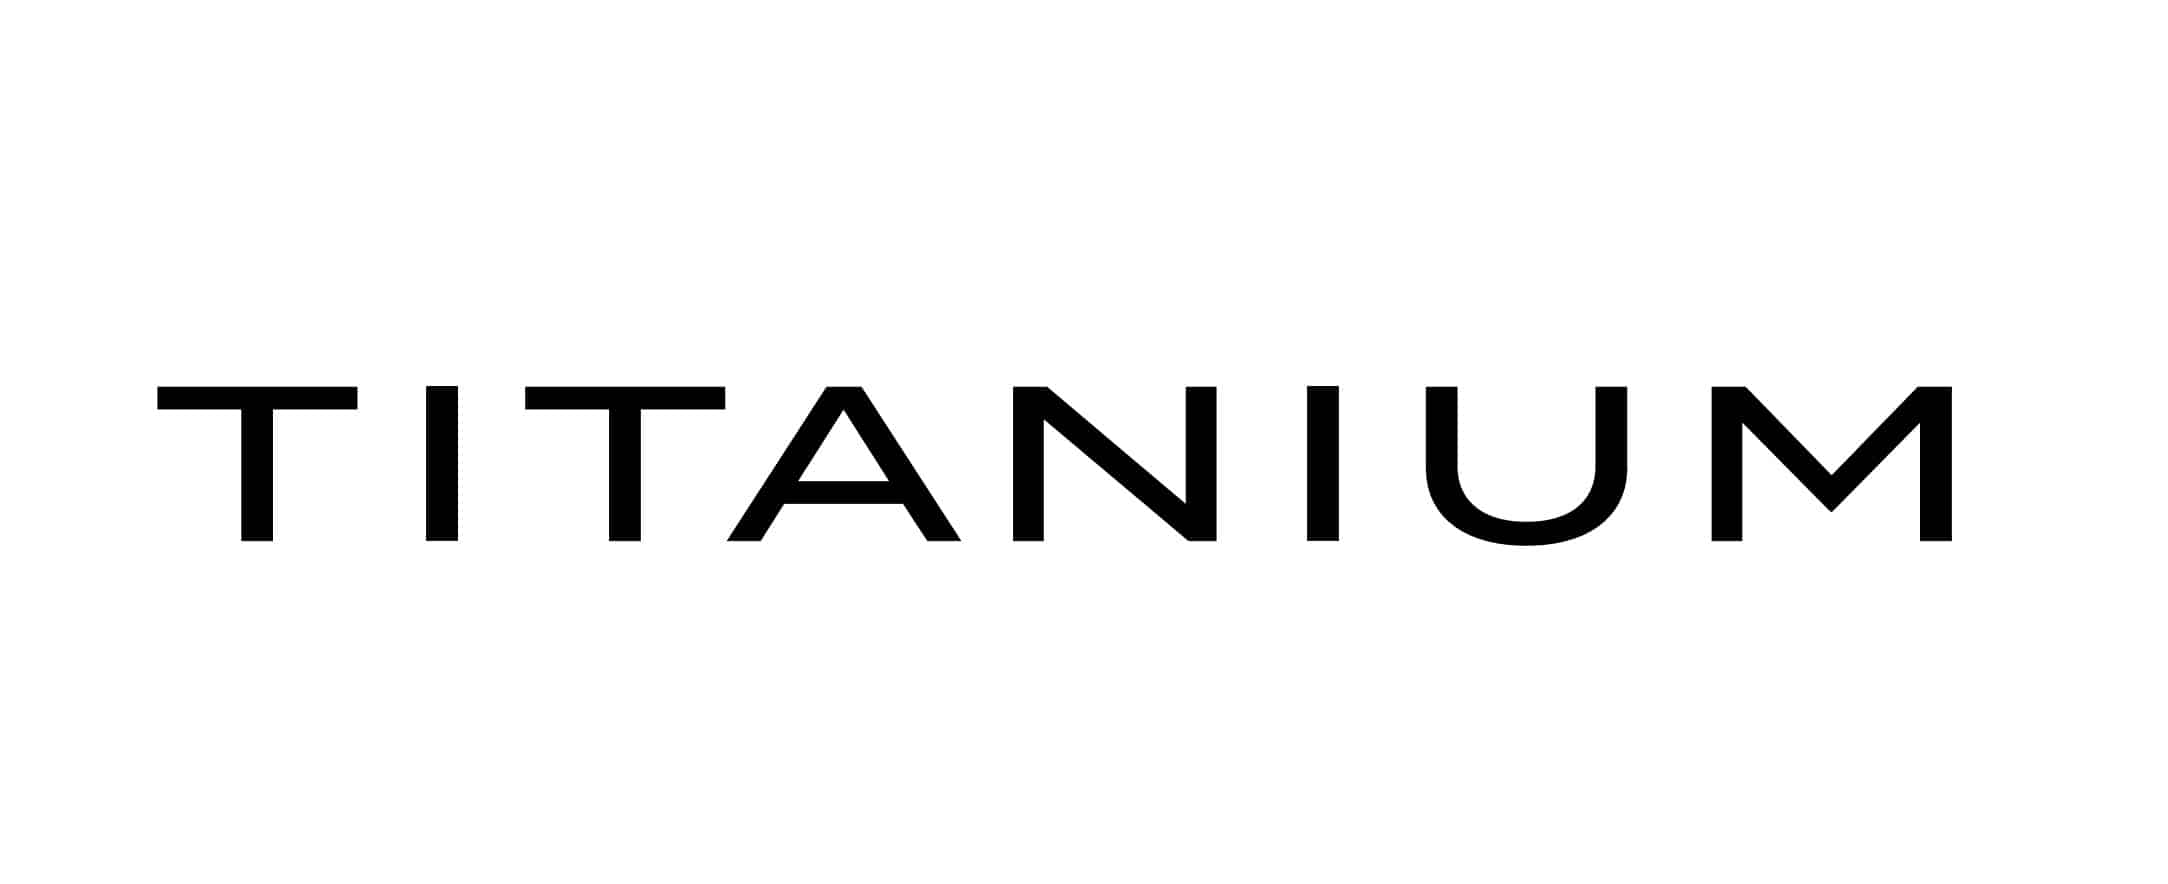 Titanium a new Expansion for UVIs Falcon